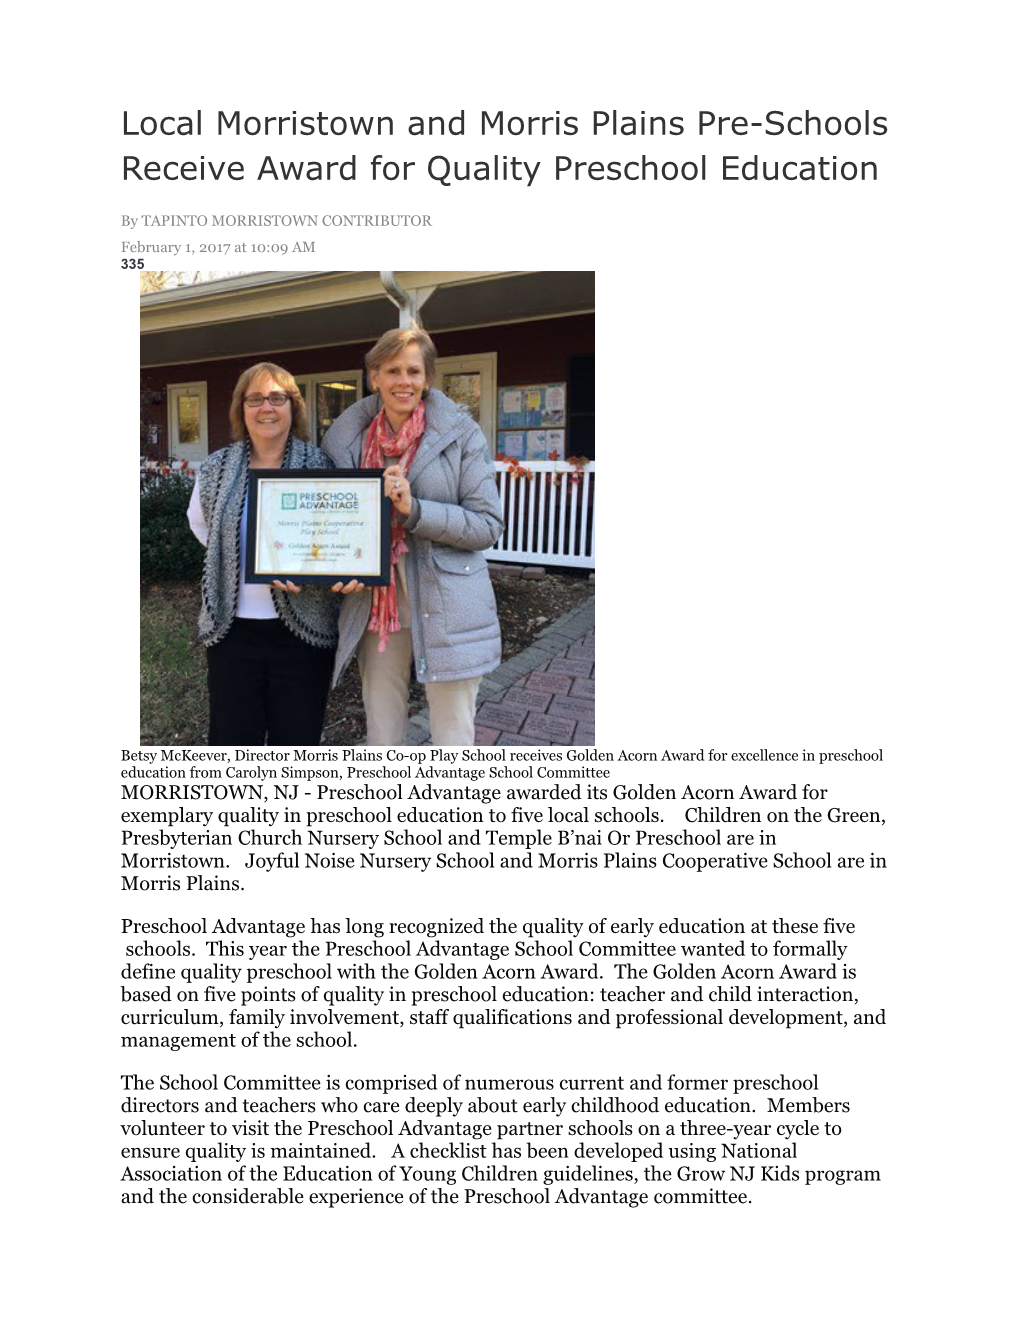 Local Morristown and Morris Plains Pre-Schools Receive Award for Quality Preschool Education